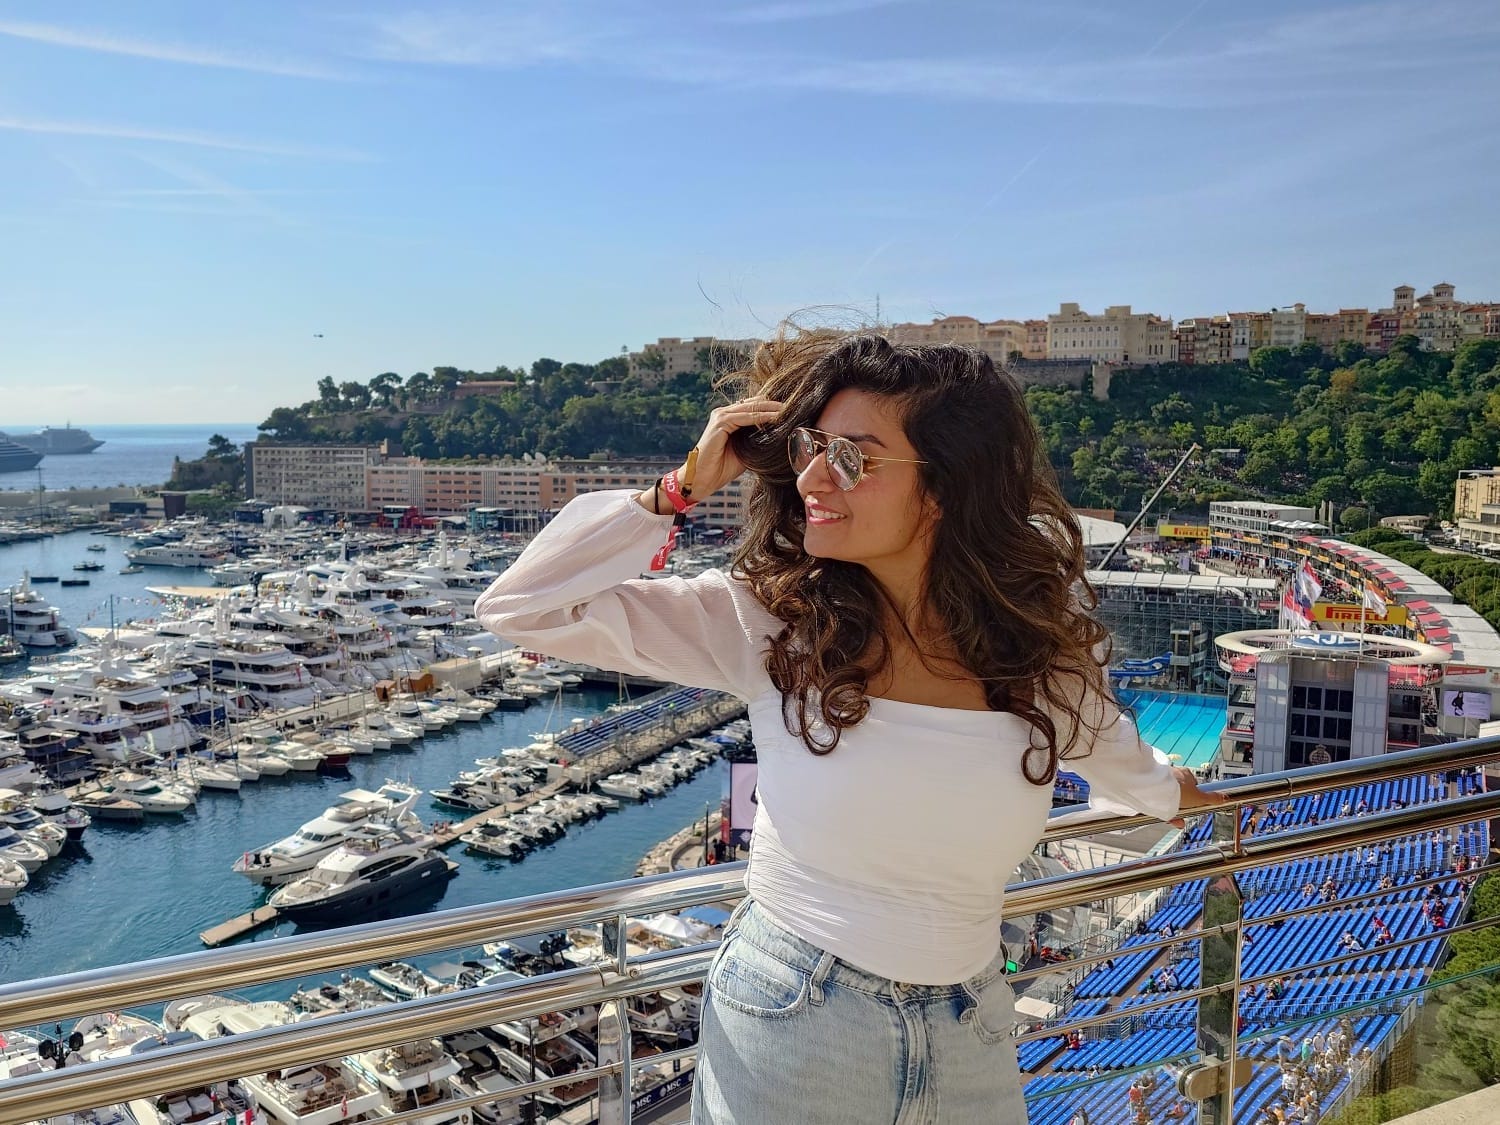 <ul class="summary-list"><li><strong>My fiancé and I splurged on a trip to Monaco for our very first Formula 1 Grand Prix.</strong></li><li><strong>For about $20,980, we stayed in Nice, </strong><a href="https://www.businessinsider.com/paris-surprising-things-about-living-in-france-from-american"><strong>France</strong></a><strong>, and attended the races all weekend.</strong></li><li><strong>We also attended a luxurious yacht party and soaked in views of Monaco during the race.</strong></li></ul><p>My fiancé and I saved up to celebrate our recent engagement in style during one of the year's most iconic, expensive weekends: the Formula 1 (F1) Monaco Grand Prix.</p><p>The F1 Monaco Grand Prix is an annual race for drivers in the <a rel="noopener noreferrer" class="c-link" href="https://www.formula1.com/en/latest/article/drivers-teams-cars-circuits-and-more-everything-you-need-to-know-about.7iQfL3Rivf1comzdqV5jwc">highest class of international racing</a> for single-seater formula cars.</p><p>Though the sport is popular in Europe, it gained the attention of international audiences with the release of Netflix's Formula 1 documentary series, "Drive to Survive." In a <a href="https://www.businessinsider.com/apple-tv-netflix-hbo-amazon-sports-documentary-athletes-content-creators-2022-12">2022 poll from Morning Consult</a>, 53% of nearly 1,900 F1 fans said the series contributed to their interest in the sport.</p><p>However, we've been dedicated F1 fans long before the series launched in 2019, and have always considered the Monaco Grand Prix the best race on the calendar.</p><p>Like many fans, we were willing to splurge to see some of our favorite drivers and were excited to attend the event this past May. We purchased a package from F1 Experiences for £15,220, or about $19,370, with a $1,610 yacht party add-on. The package for my partner and me included a <a href="https://www.businessinsider.com/things-guests-should-stop-doing-at-hotels-former-employee">hotel stay</a>, two days of live racing, and transportation to and from the event.</p><p>From an unbelievable <a href="https://www.businessinsider.com/taj-cape-town-five-star-hotel-review-worth-it-2024">balcony view</a> of the racetrack to cheering on a historic win, here's what the experience was like.</p><div class="read-original">Read the original article on <a href="https://www.businessinsider.com/saw-formula-one-grand-prix-live-monaco-worth-it-2024-6">Business Insider</a></div>